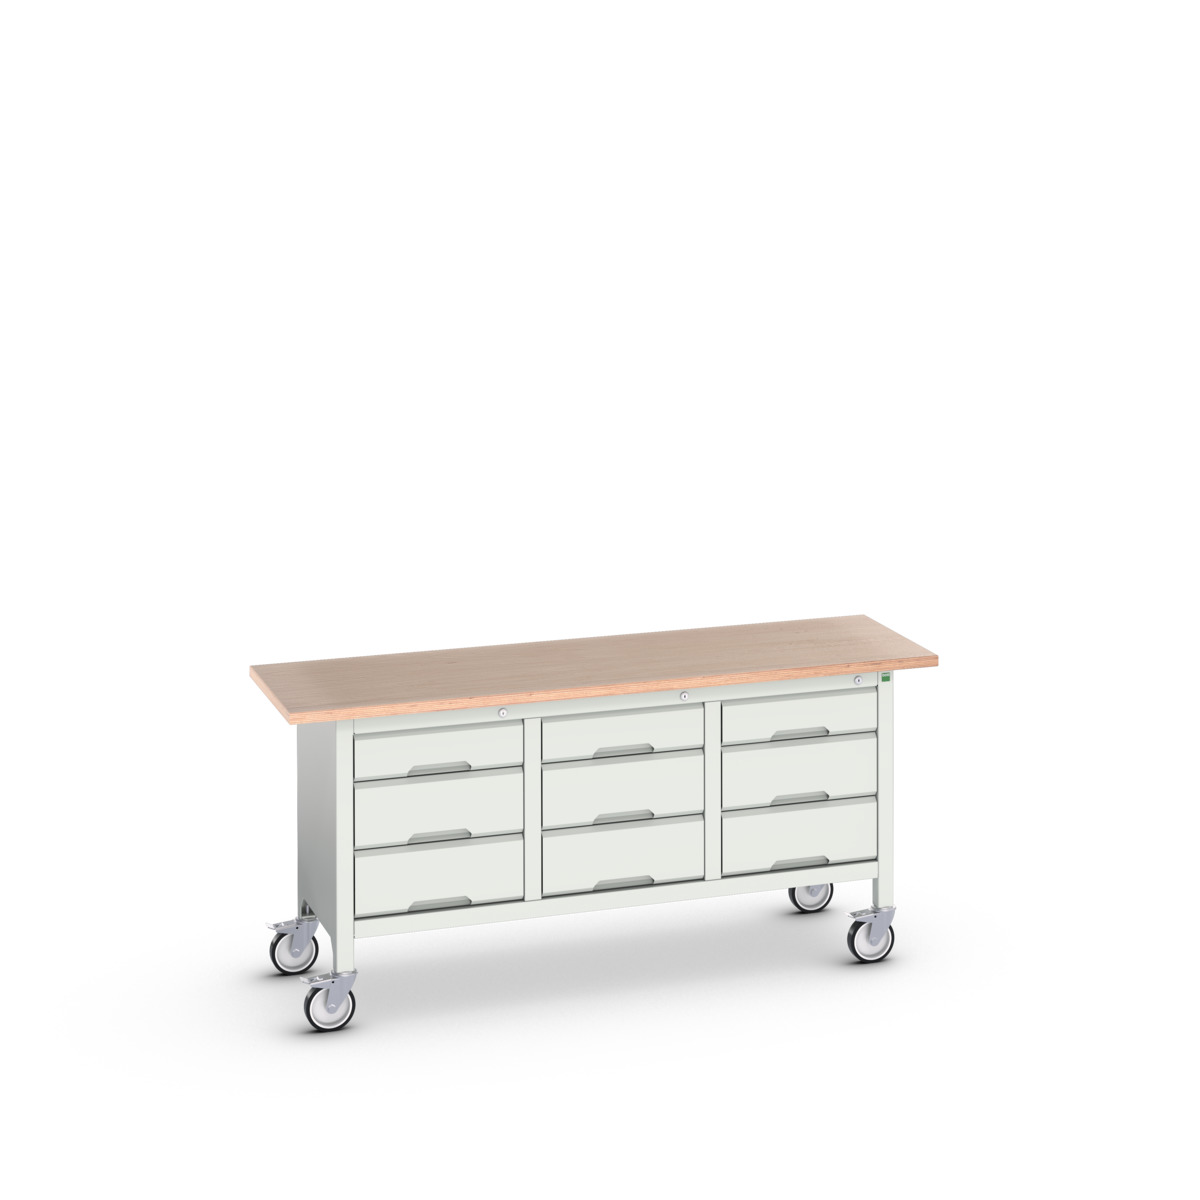 16923223.16 - verso mobile storage bench (mpx)